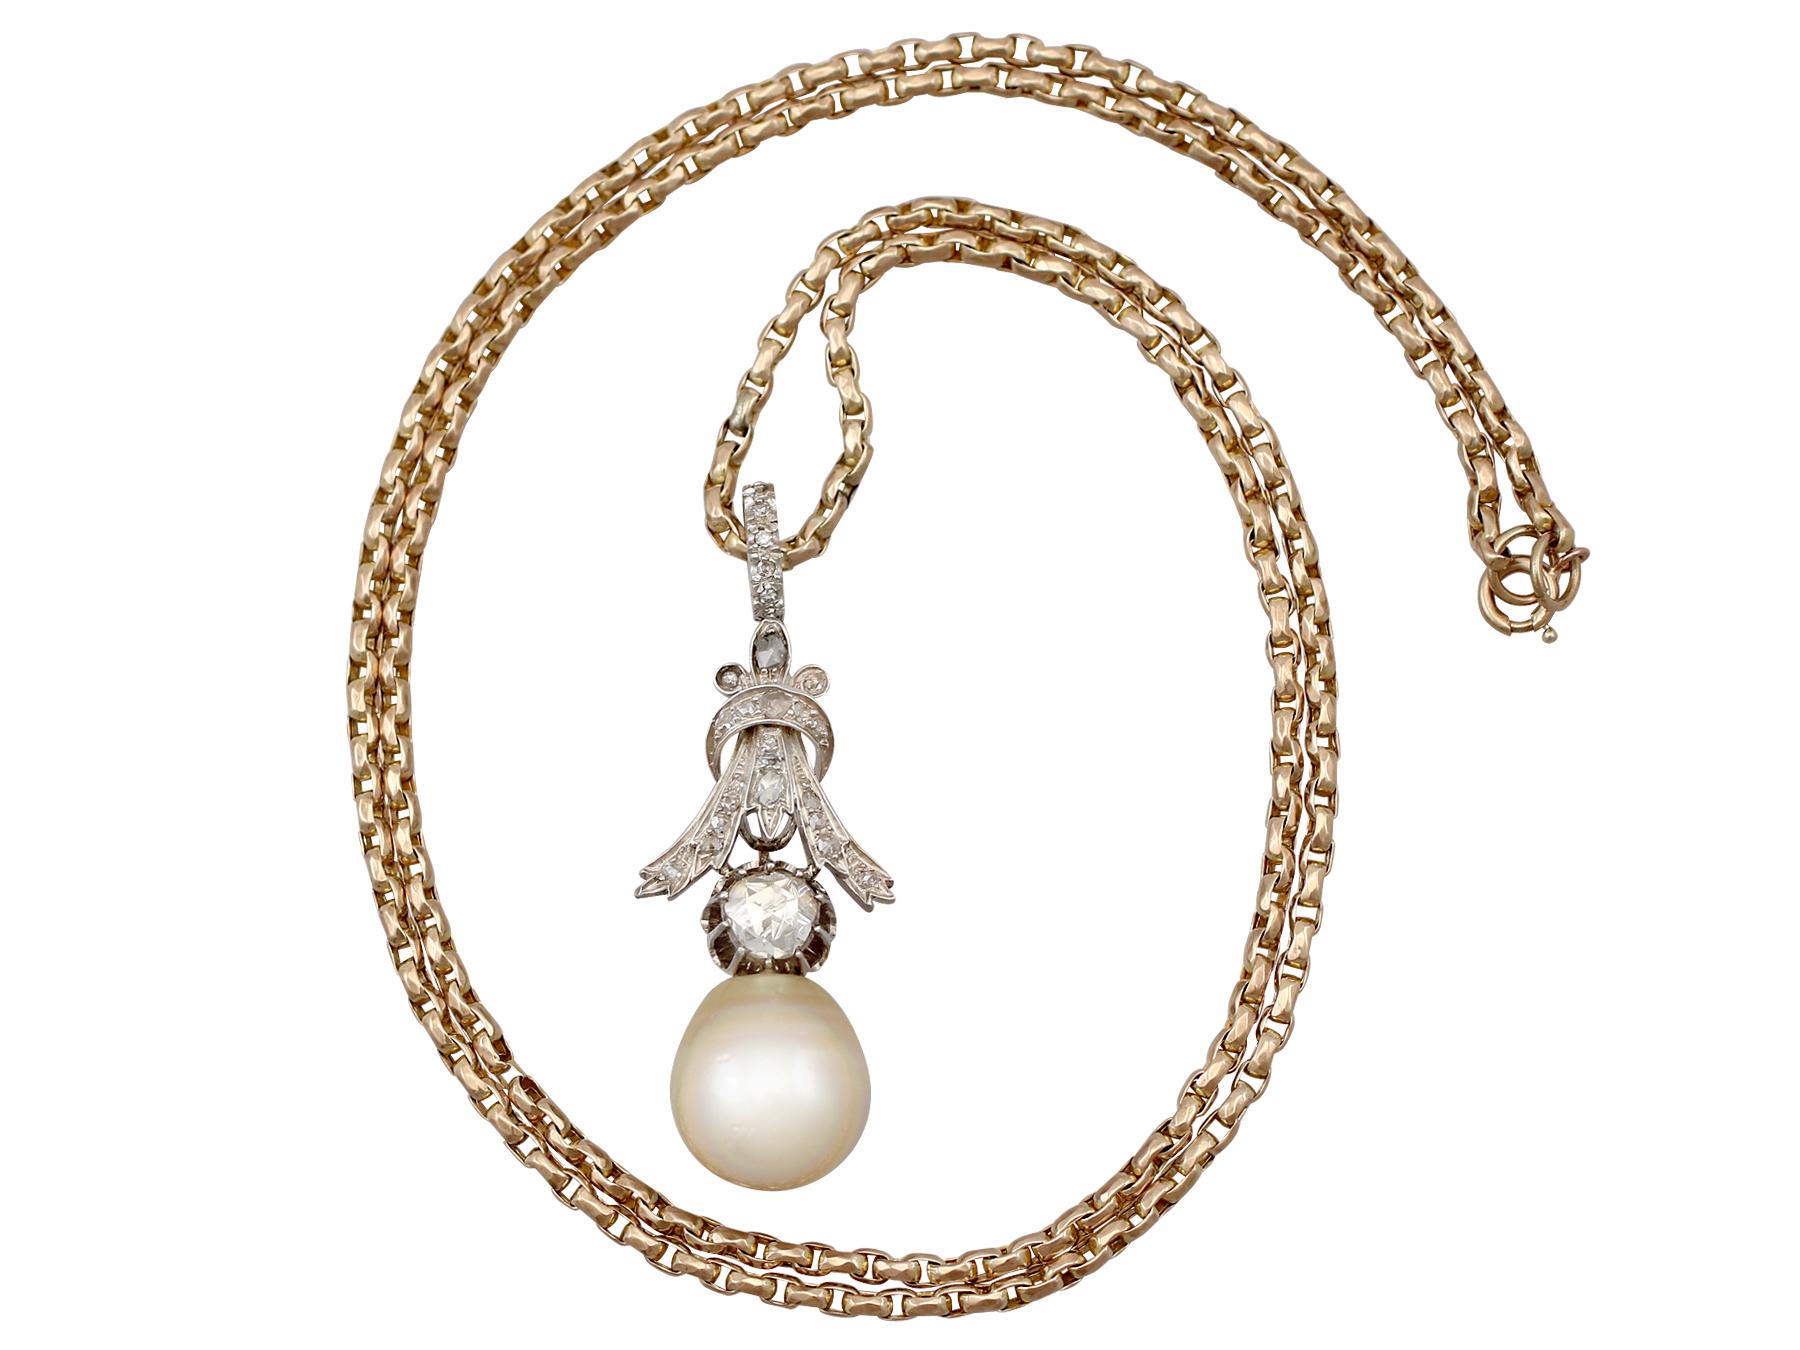 A stunning antique and vintage 1.23 carat diamond and South Sea pearl, 18 karat yellow gold and silver set pendant; part of our diverse antique jewelry and estate jewelry collections.

This stunning, fine and impressive antique pearl pendant has